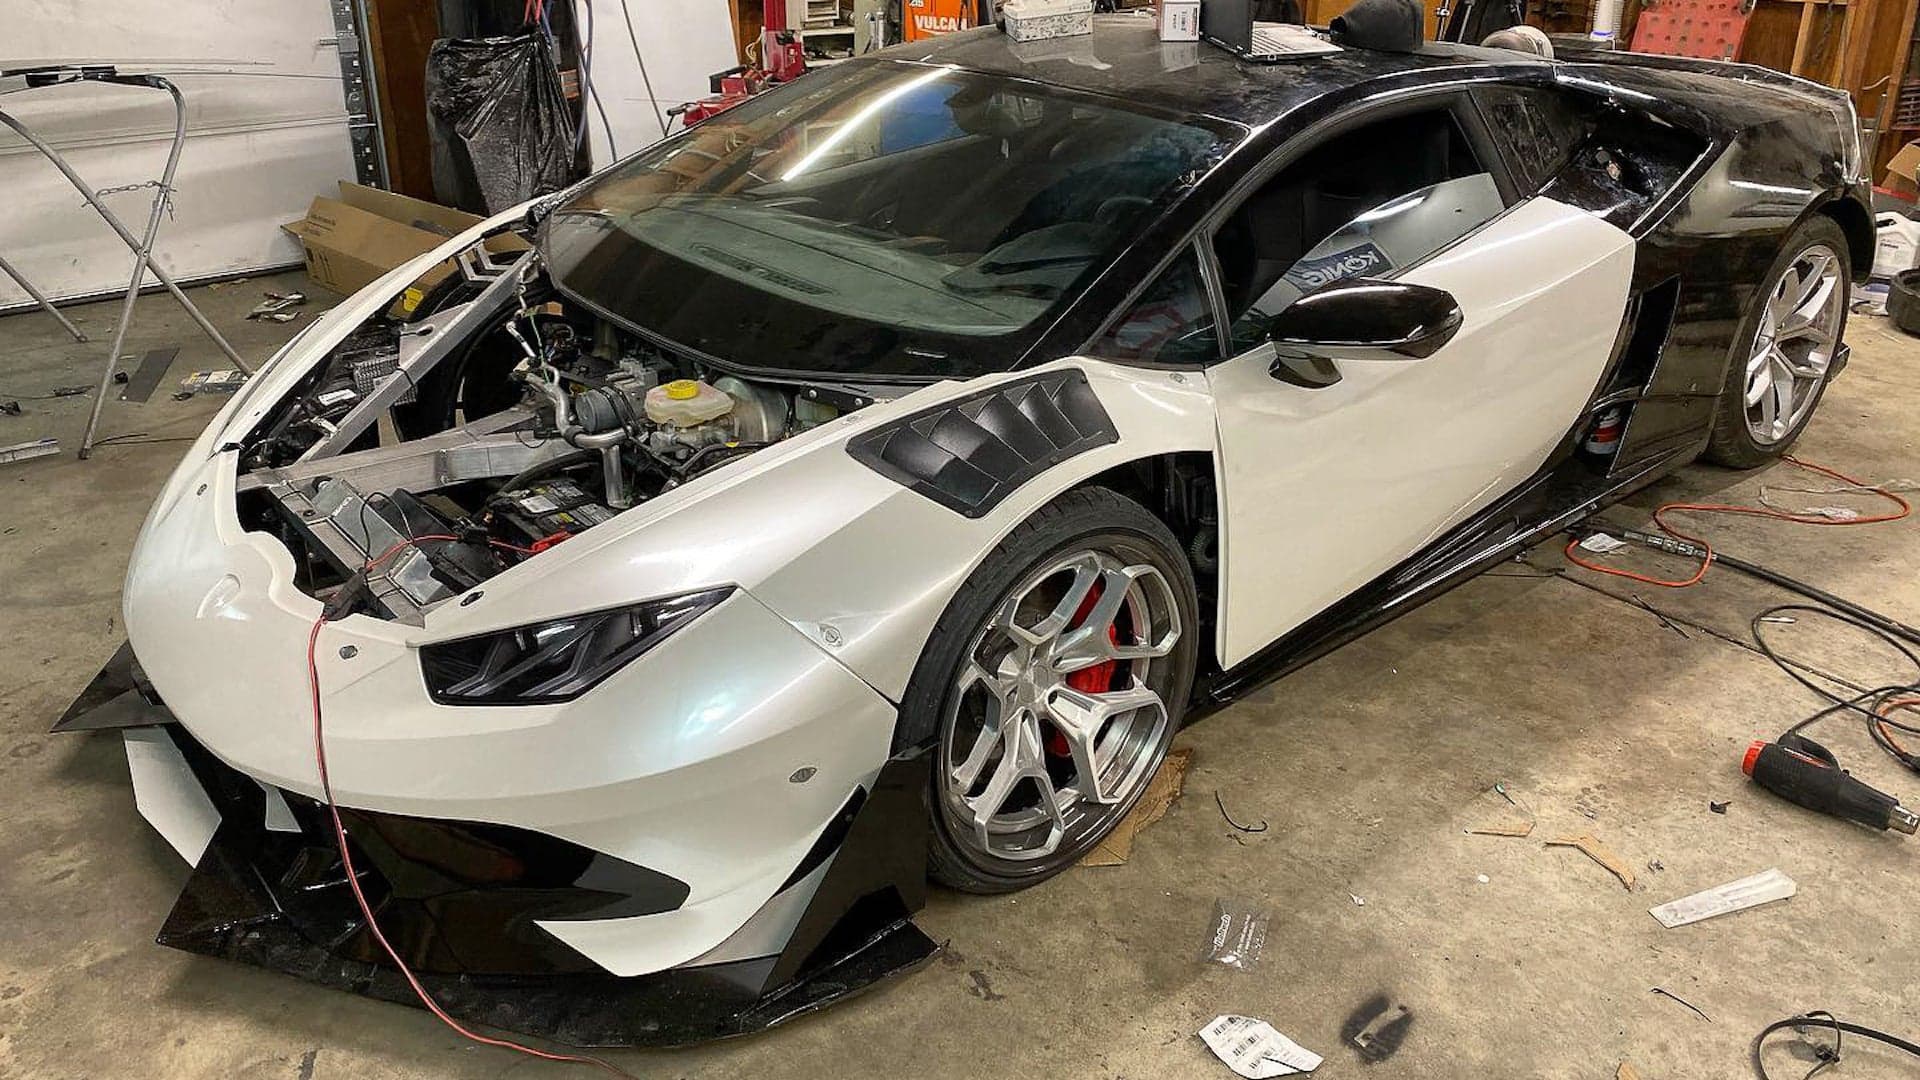 Lamborghini ‘Burntacan’ Project Rises From the Ashes in Time for SEMA 2019